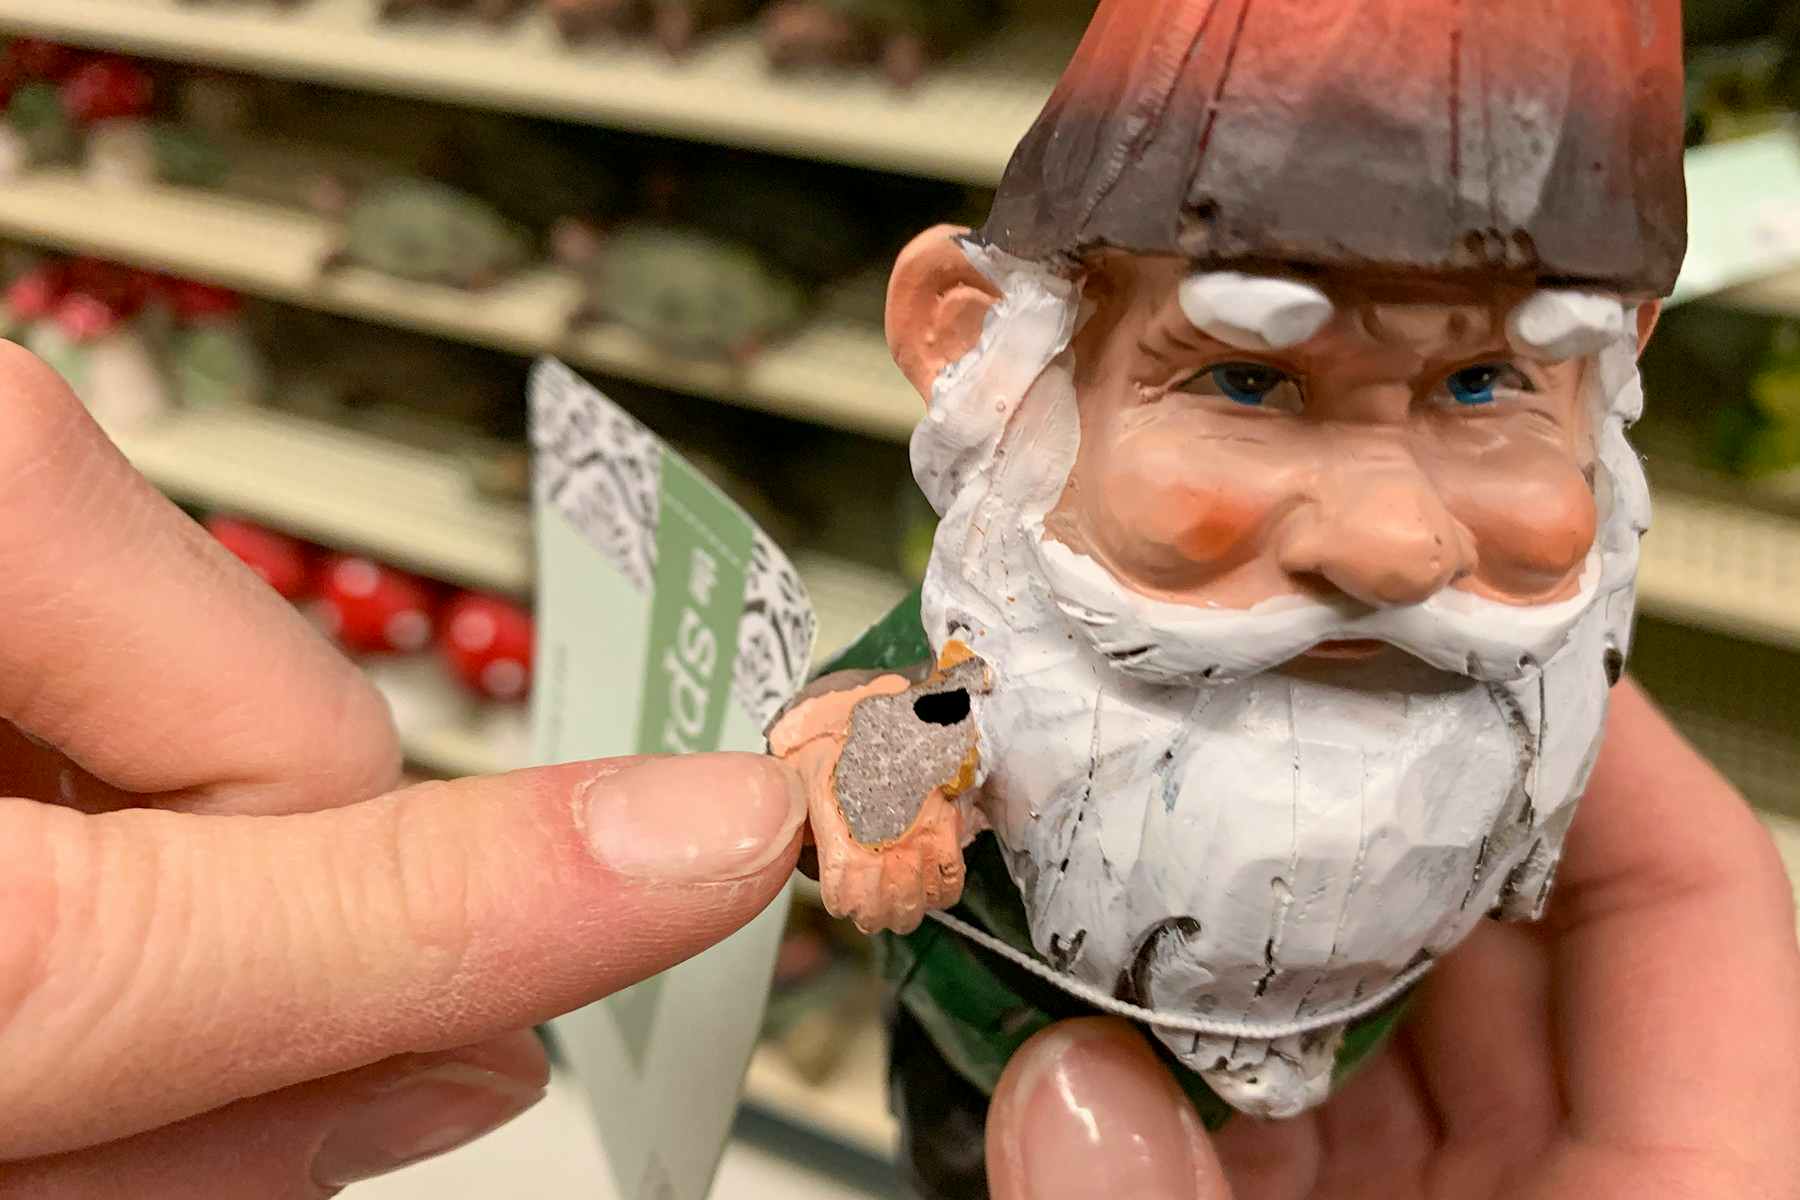 Someone pointing to the chip on a garden gnome.